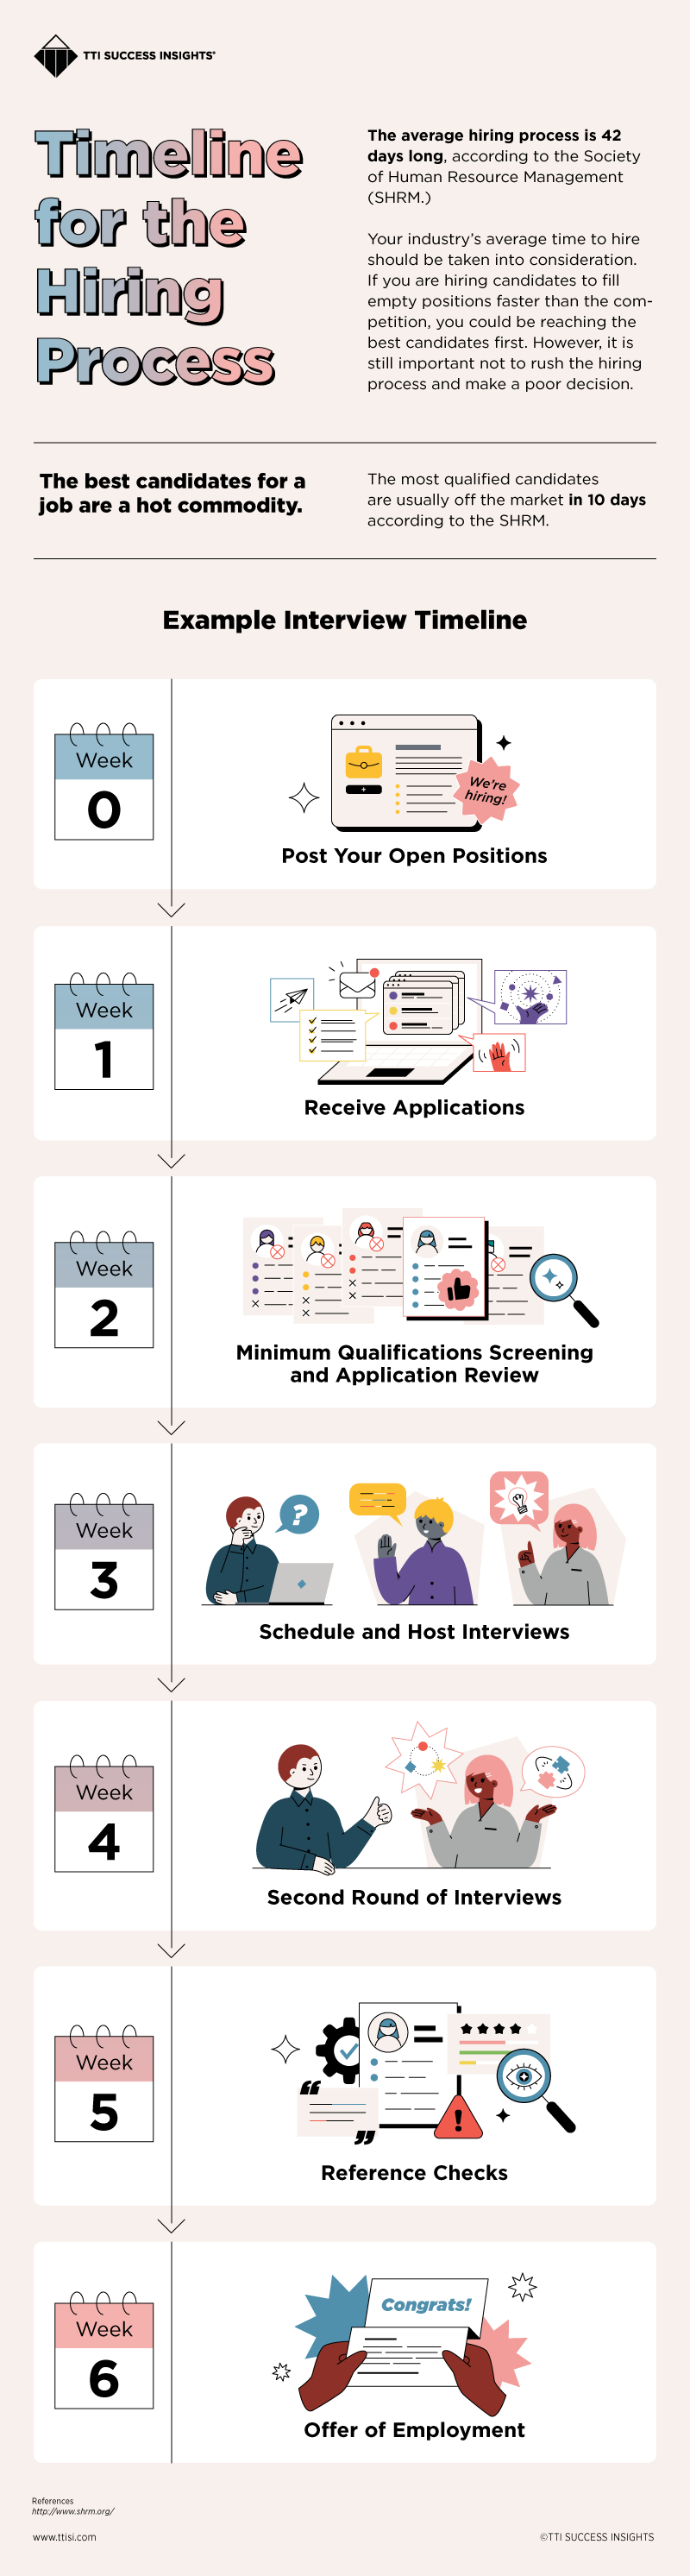 timeline-for-the-hiring-process-jun-2023